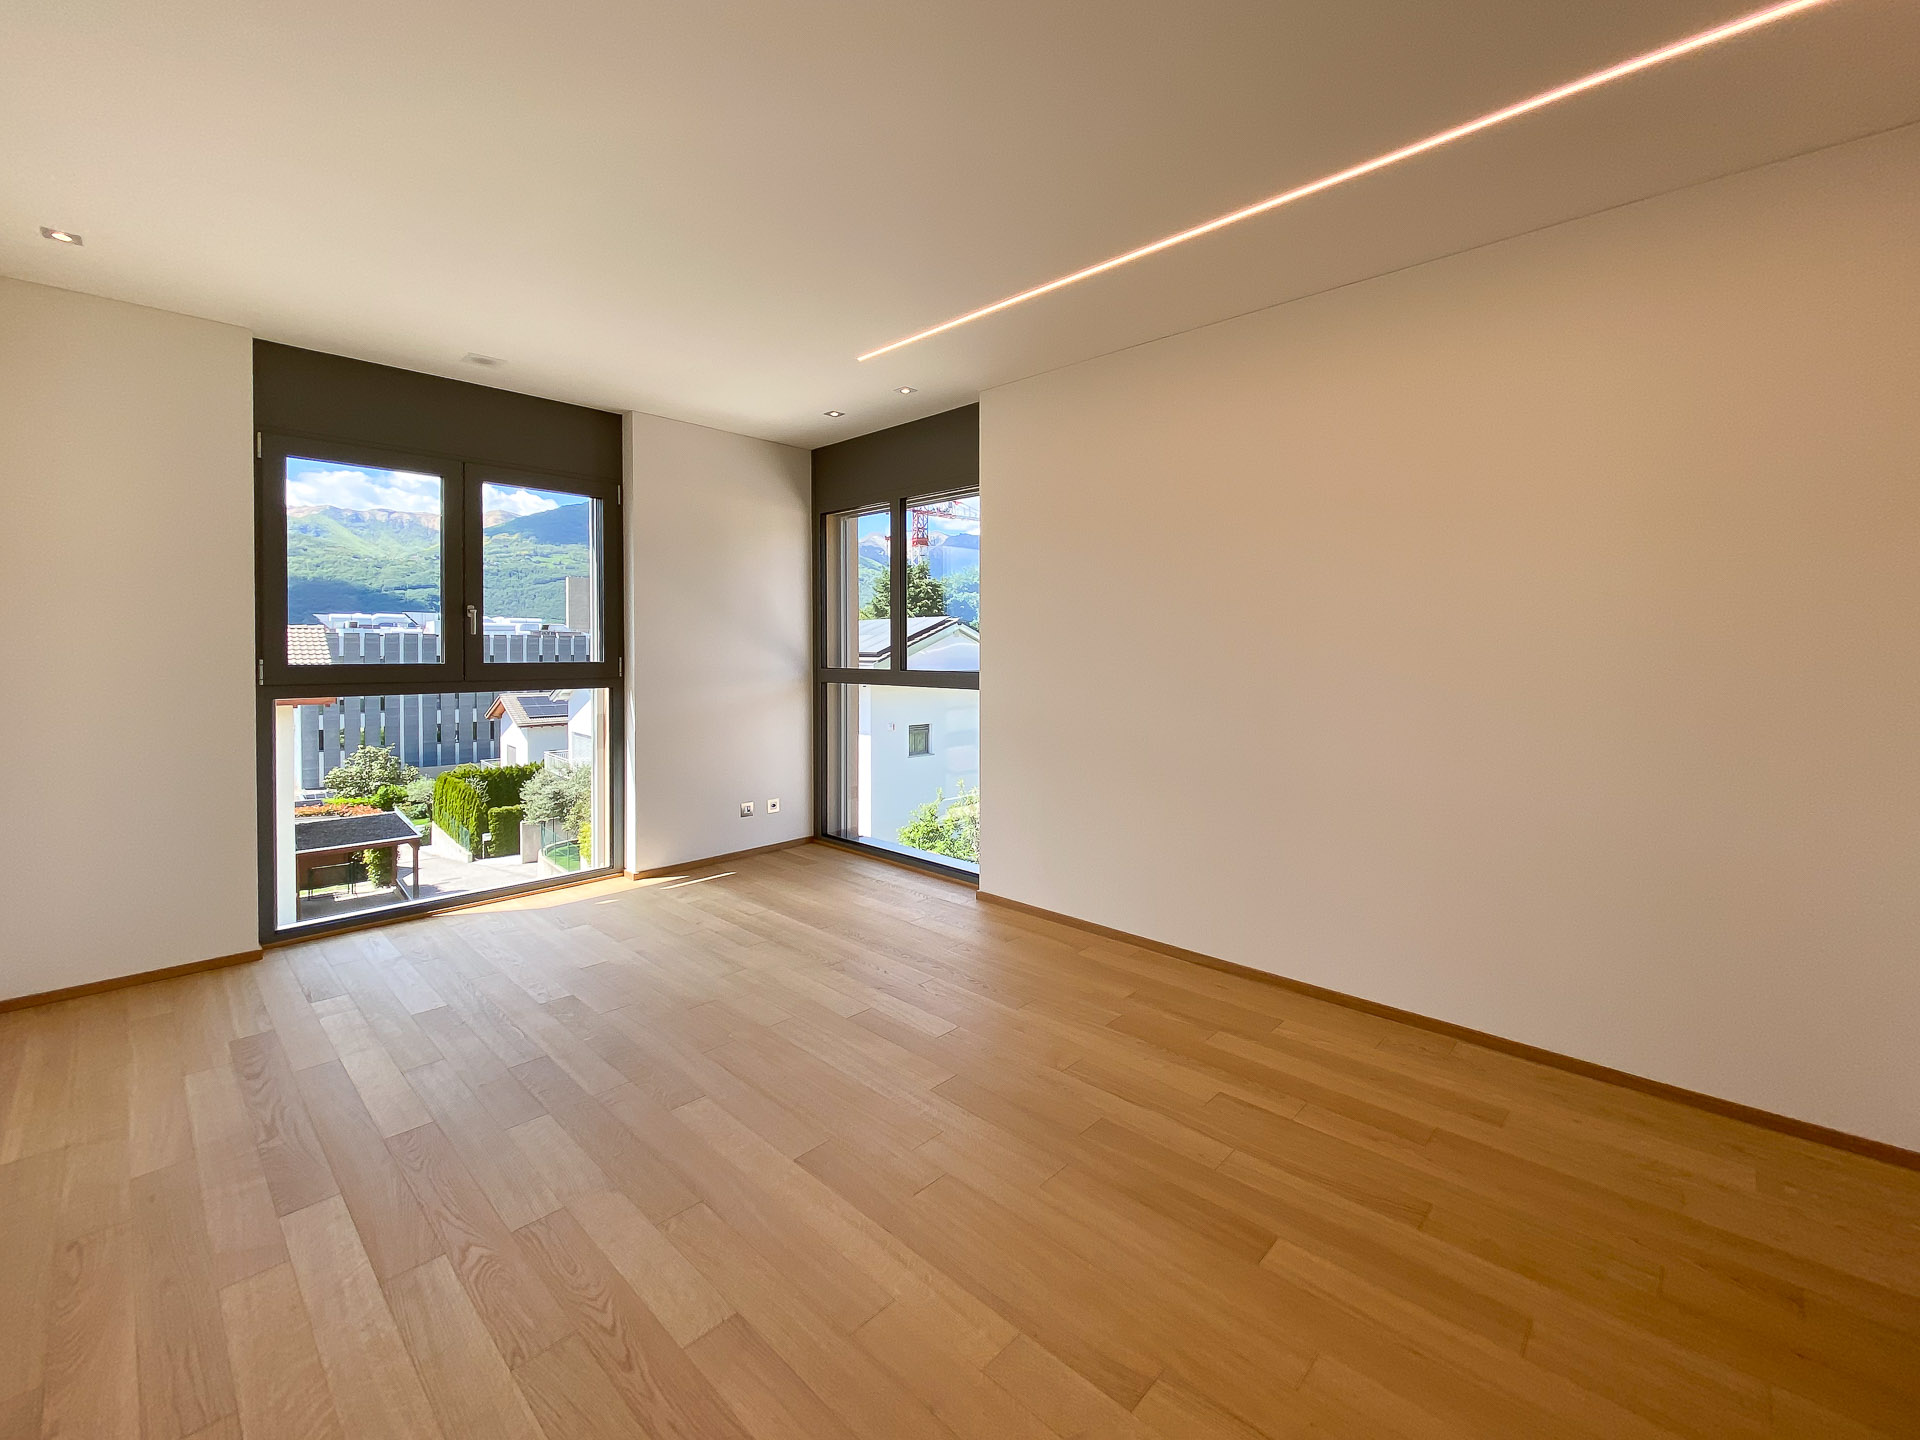 Modern 3.5-room apartment for sale in a newly built residence